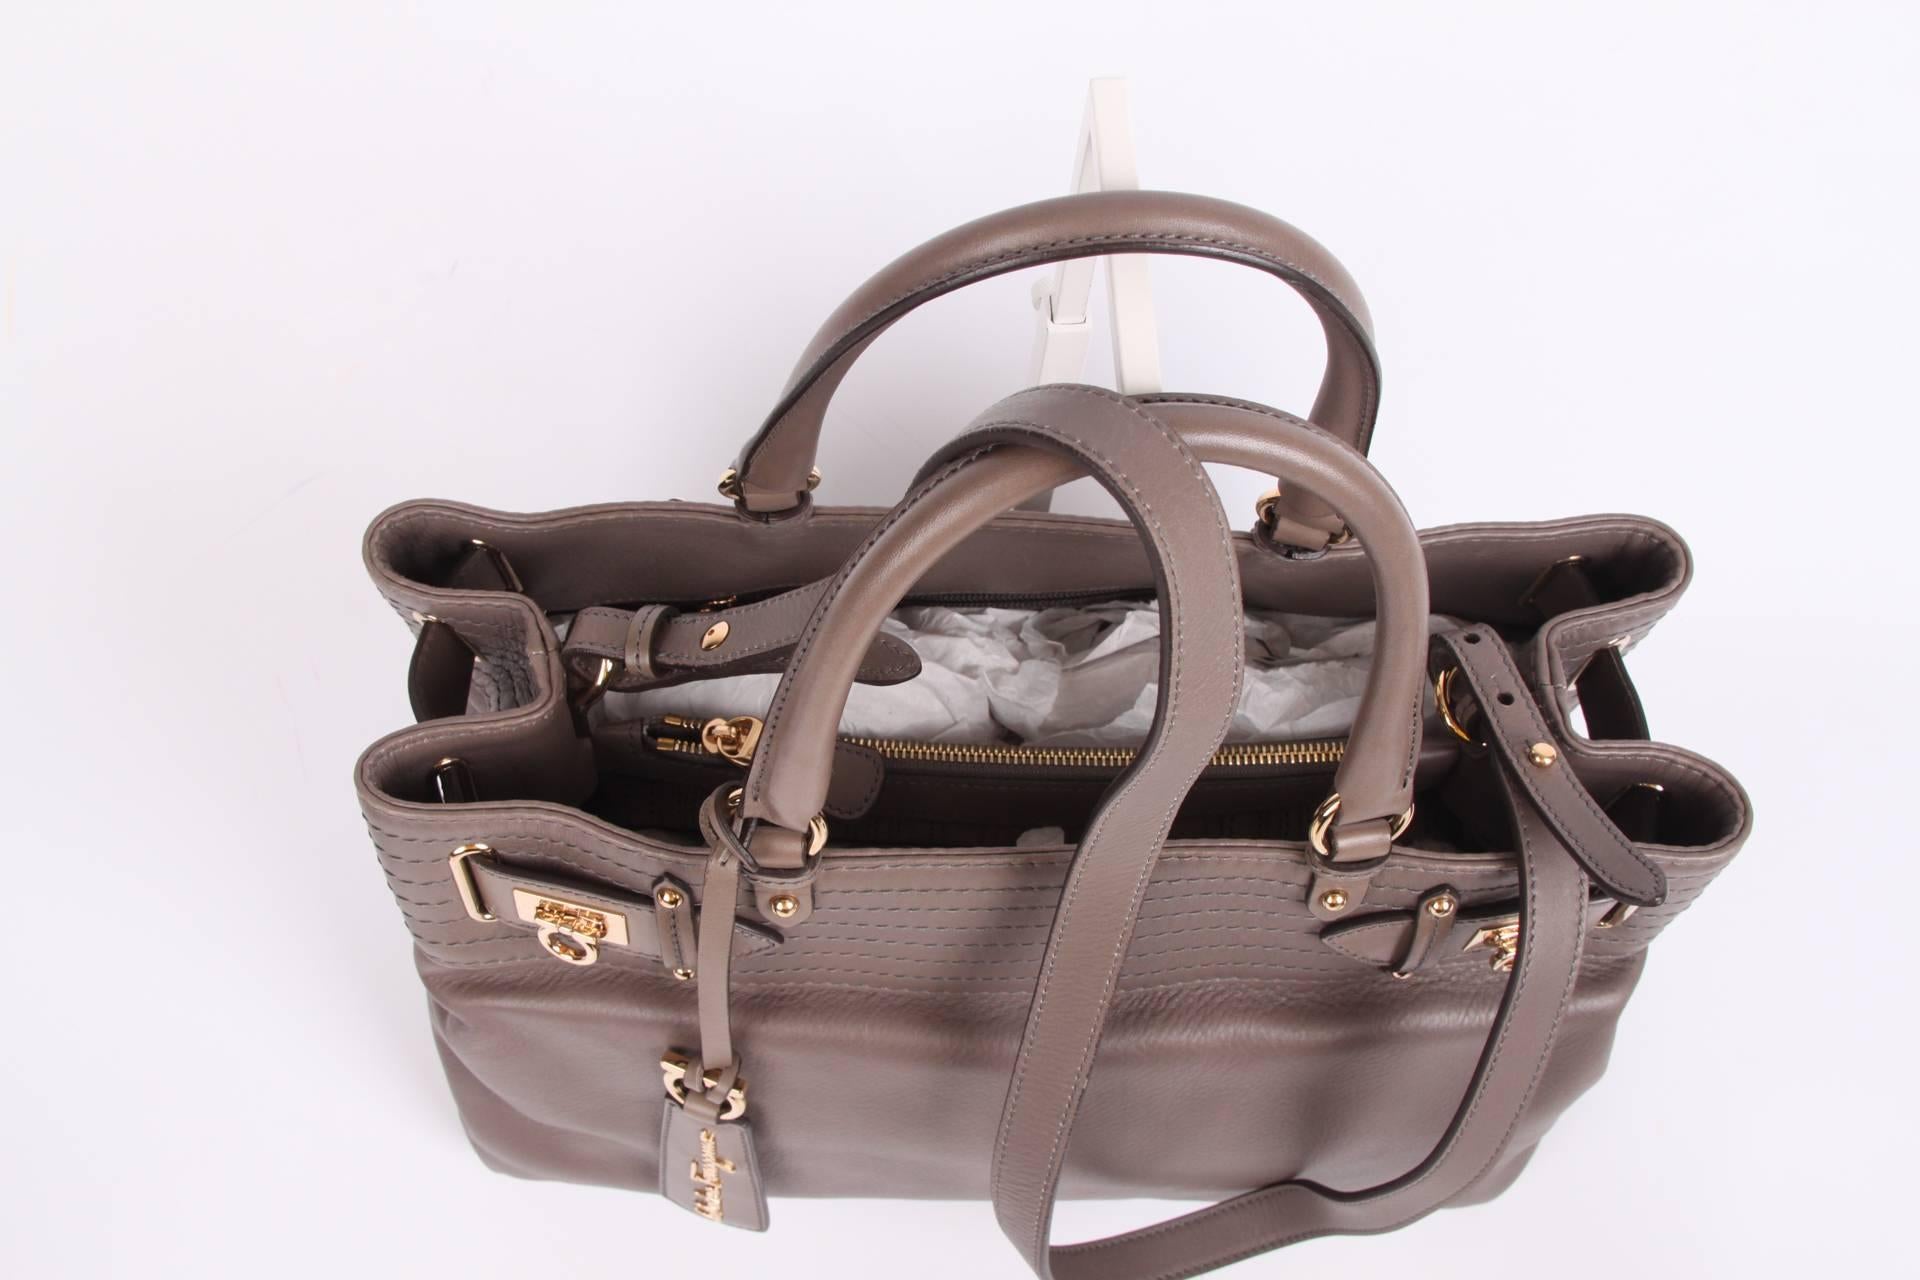 Super stylish bag by Salvatore Ferragamo, due to its rather large size also very suitable for the office. Very pretty!

Made of calfskin leather in a wonderful shade of taupe. Two handles on top and also an adjustable and detachable shoulder strap.